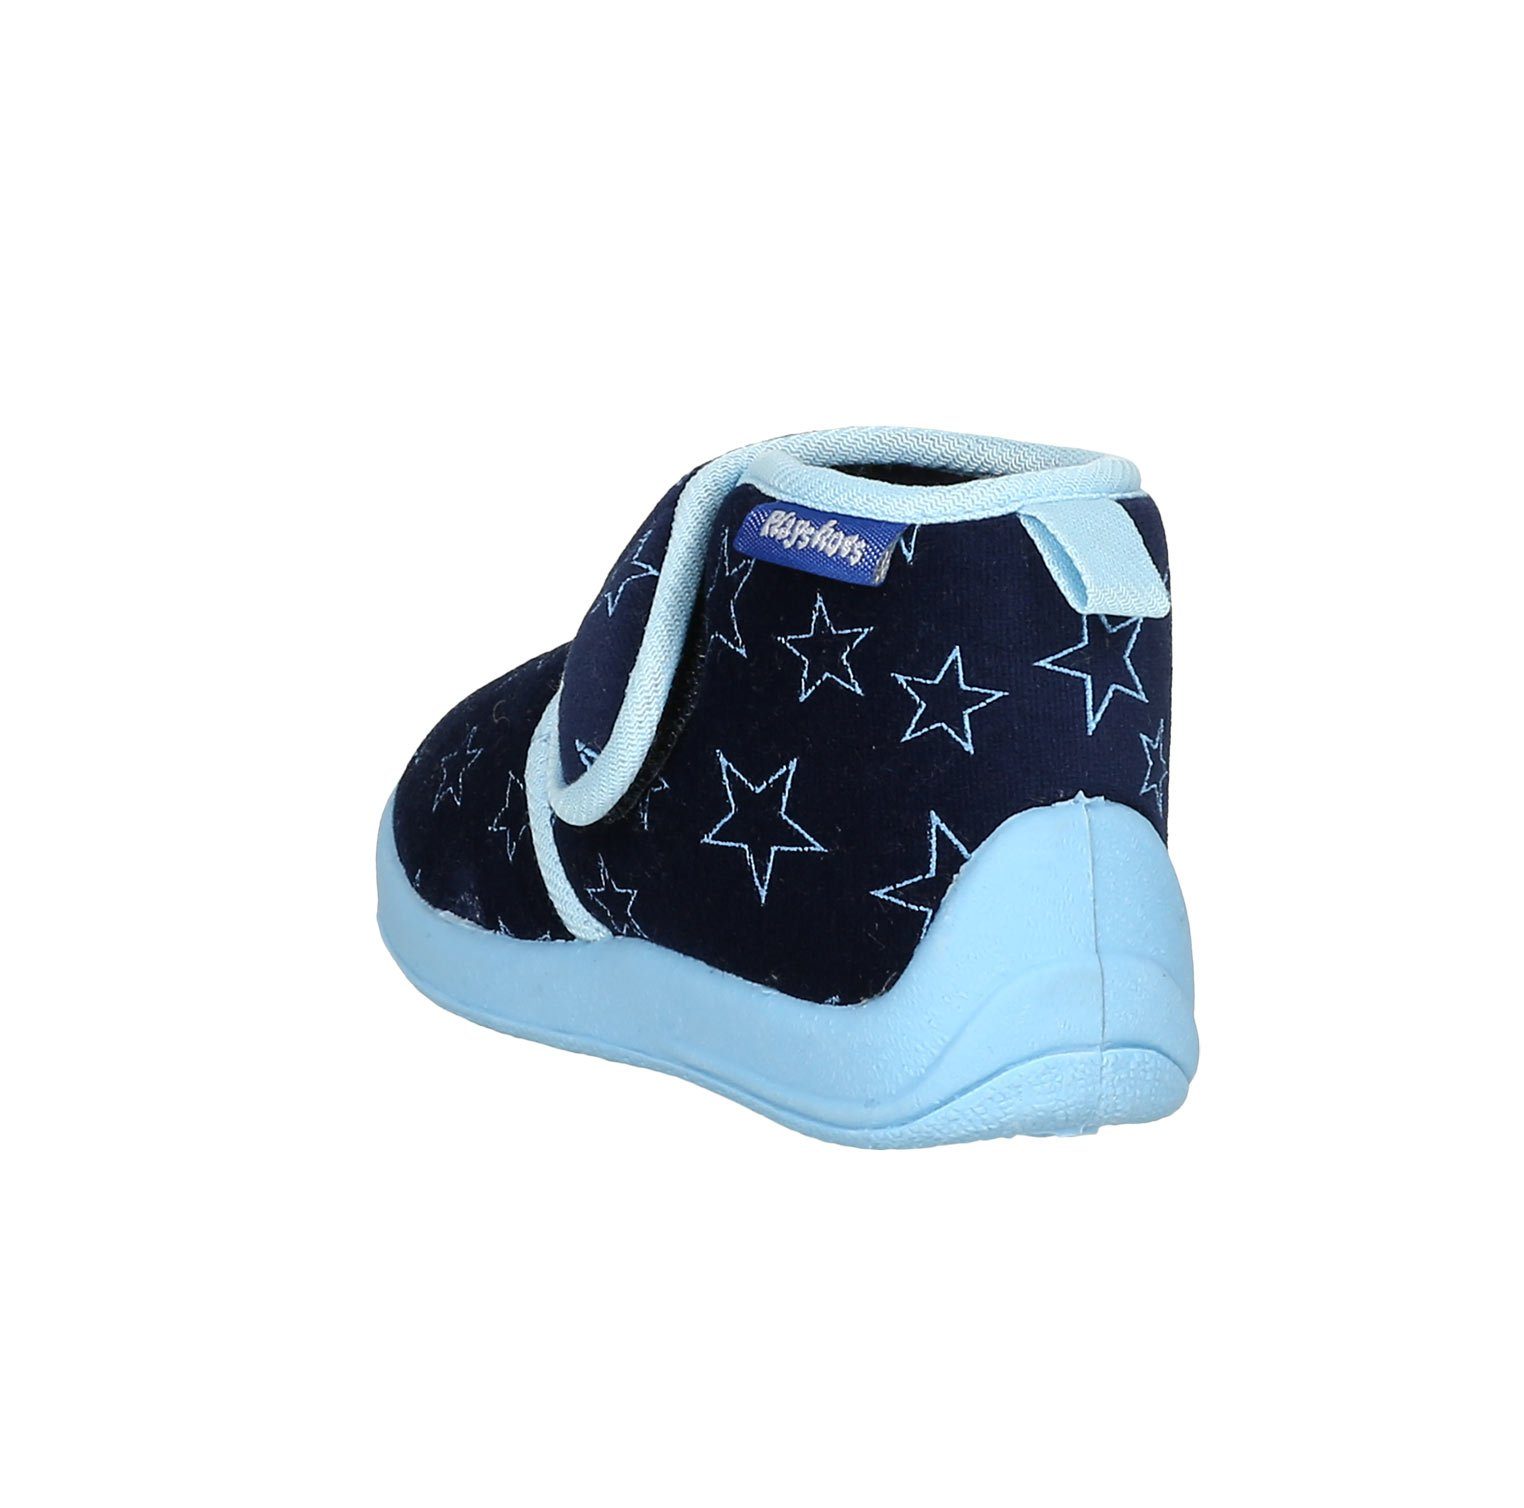 Hausschuh Pastell Hausschuh Marine Playshoes